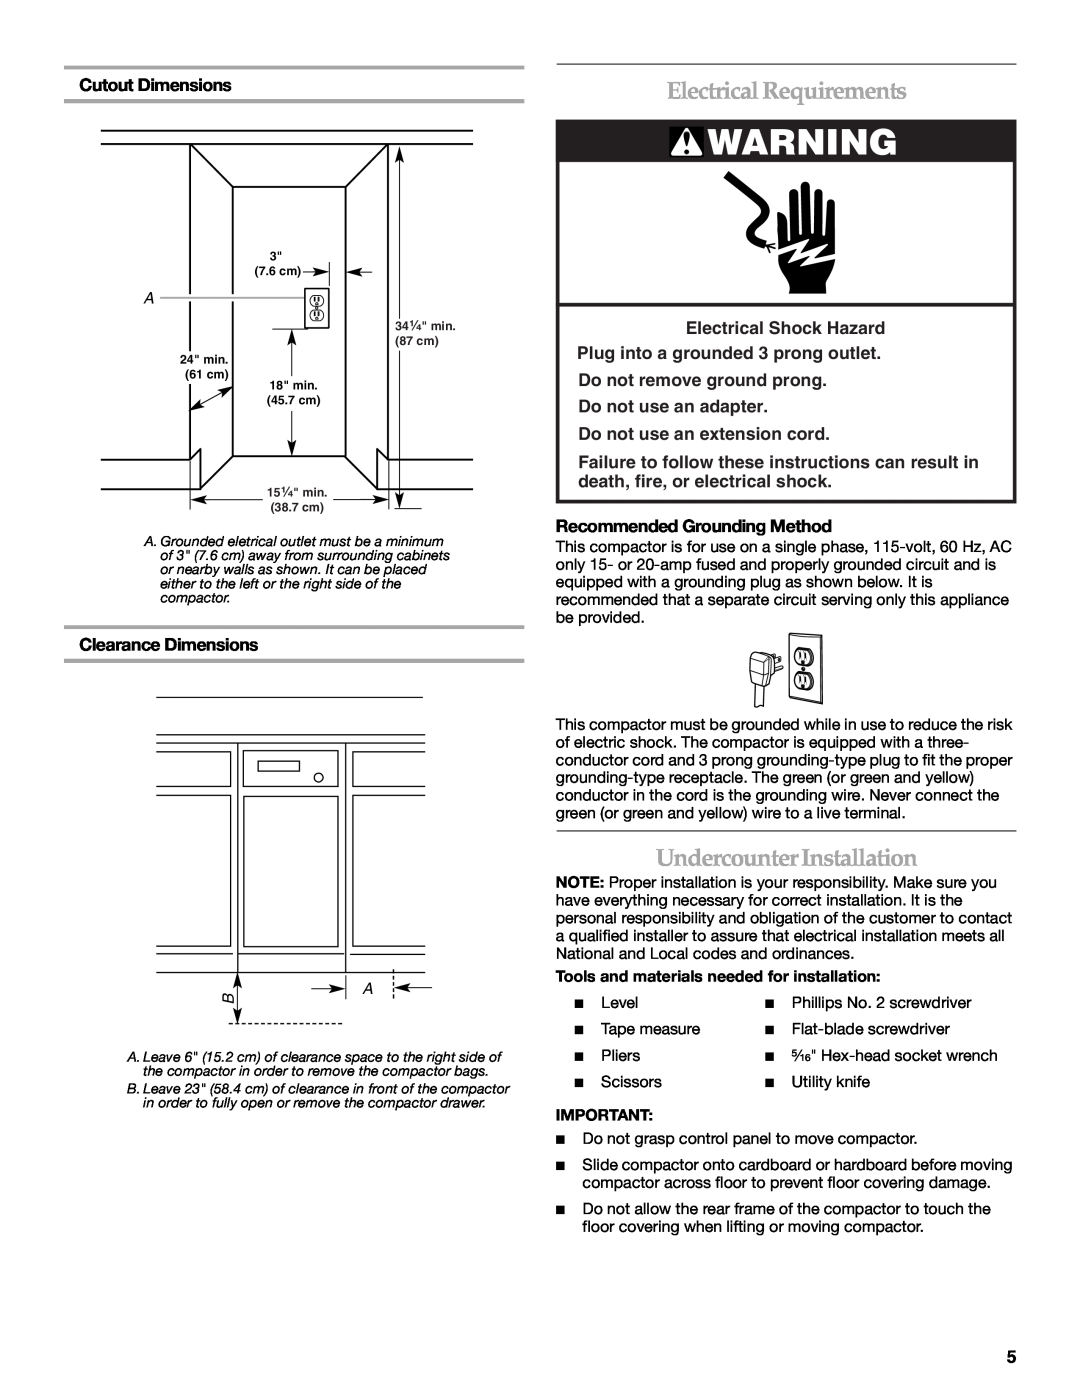 KitchenAid 9871915A manual Electrical Requirements, UndercounterInstallation, Cutout Dimensions, Clearance Dimensions 